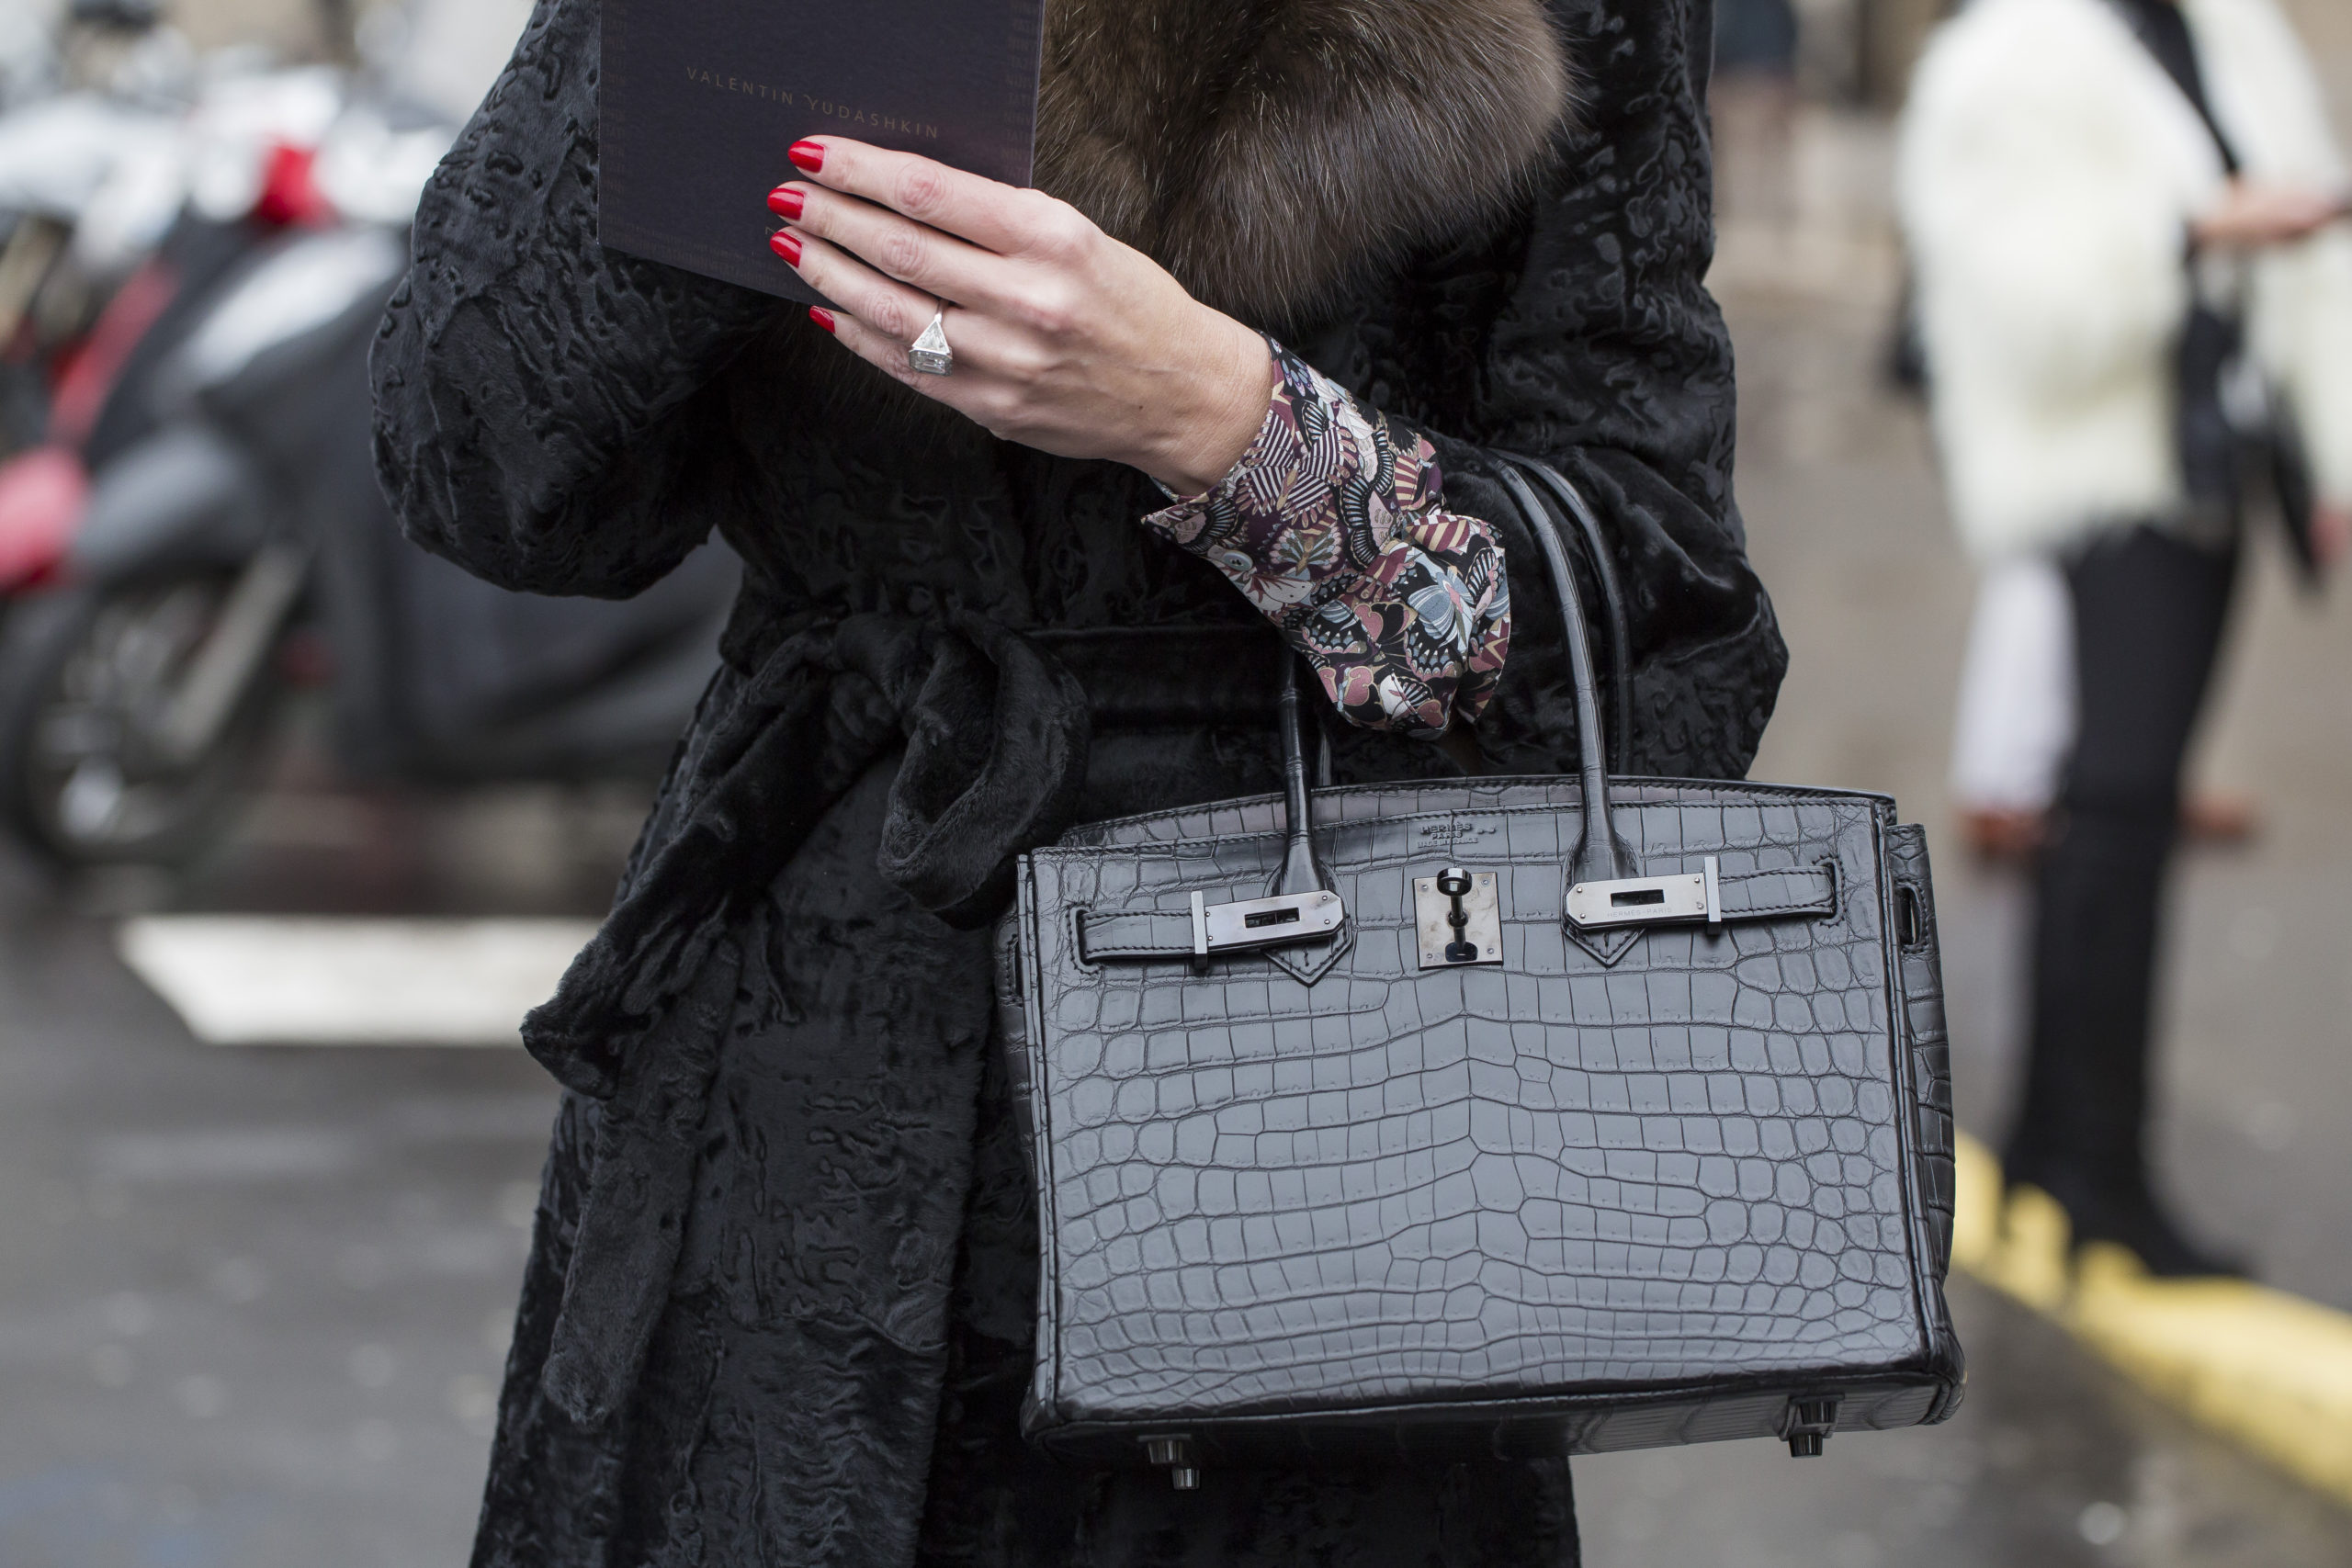 Princess Diana's iconic Gucci bag is BACK & it's had a pretty epic